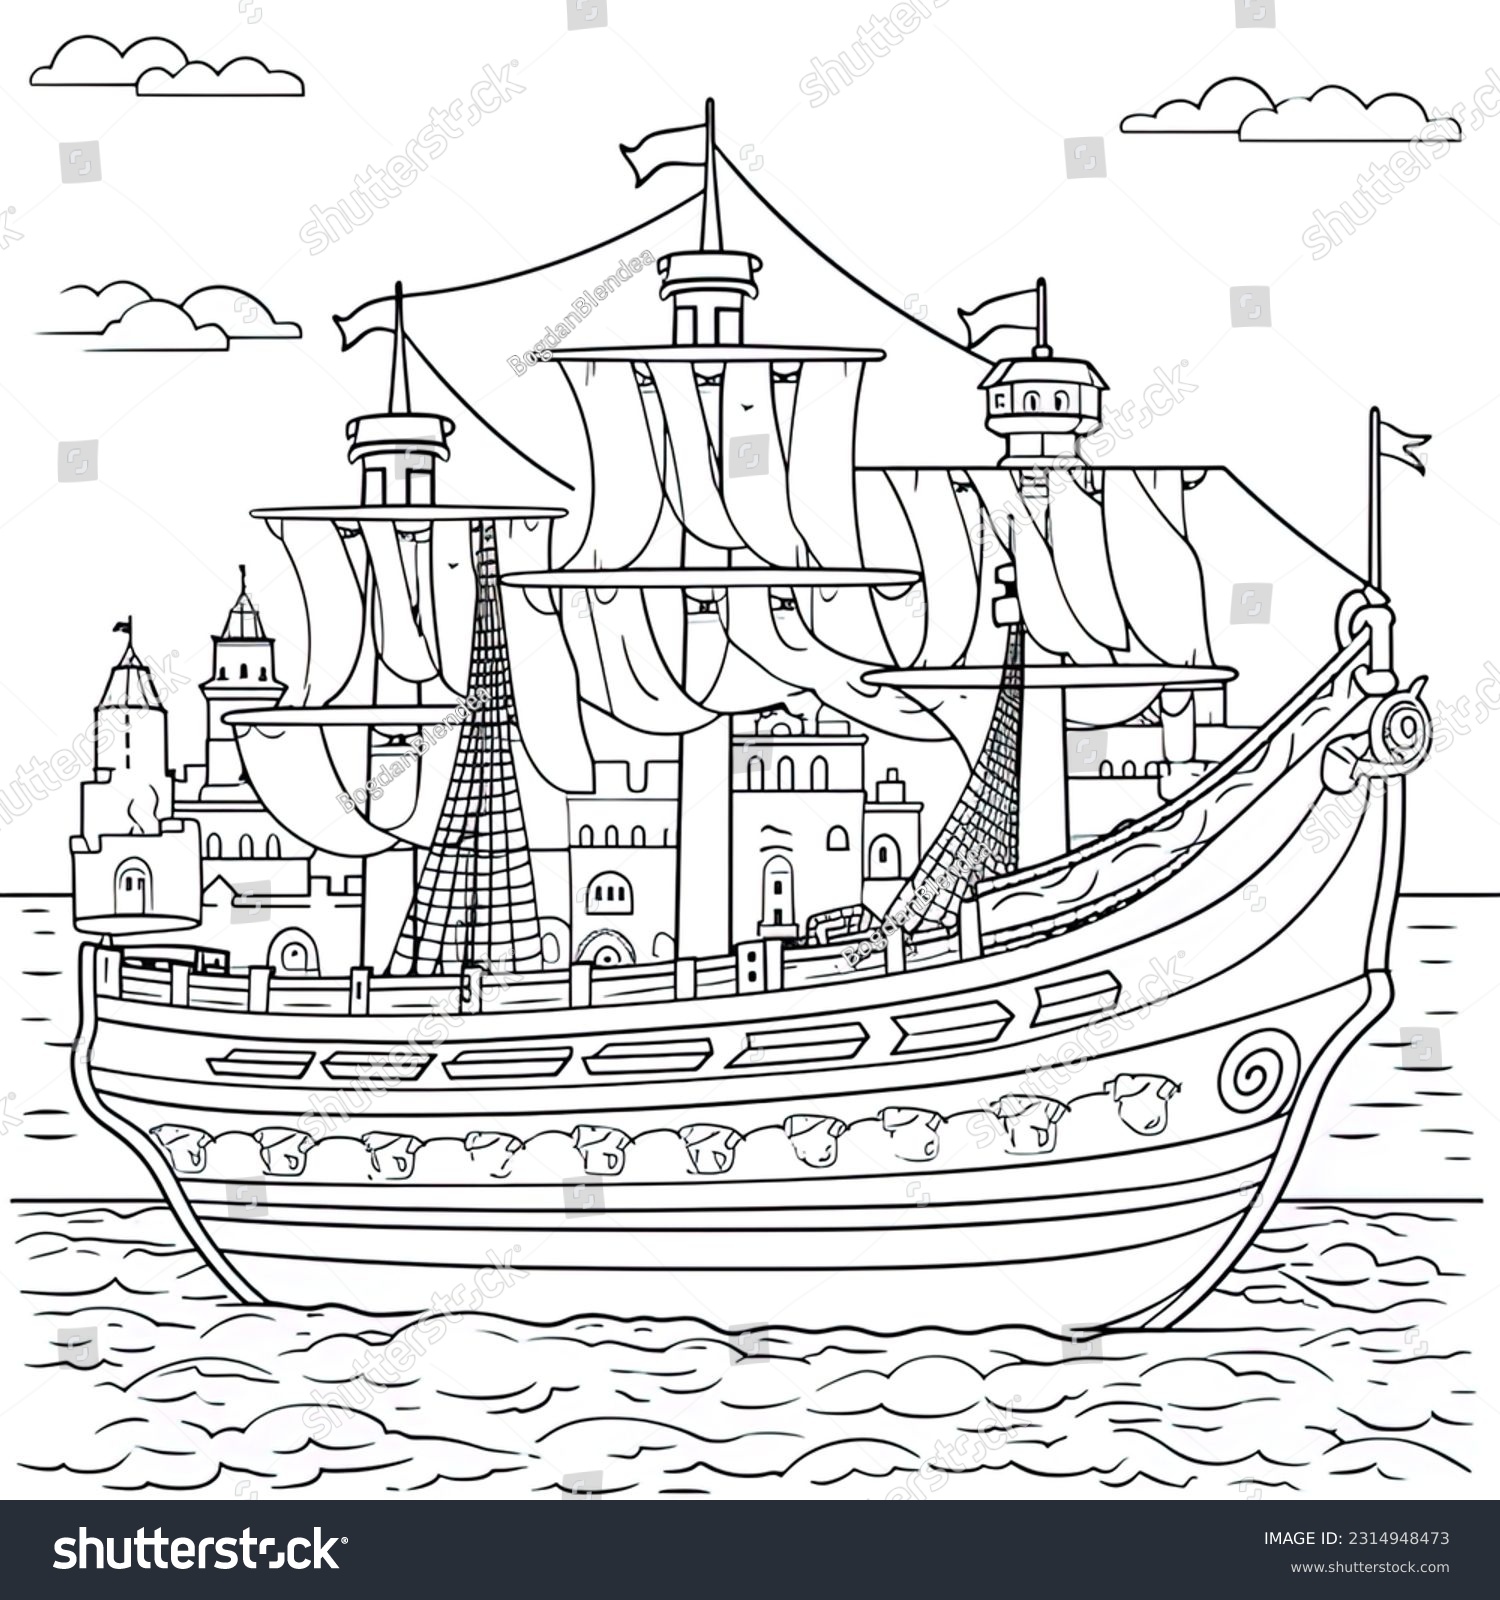 Thousand colouring pages pirates royalty